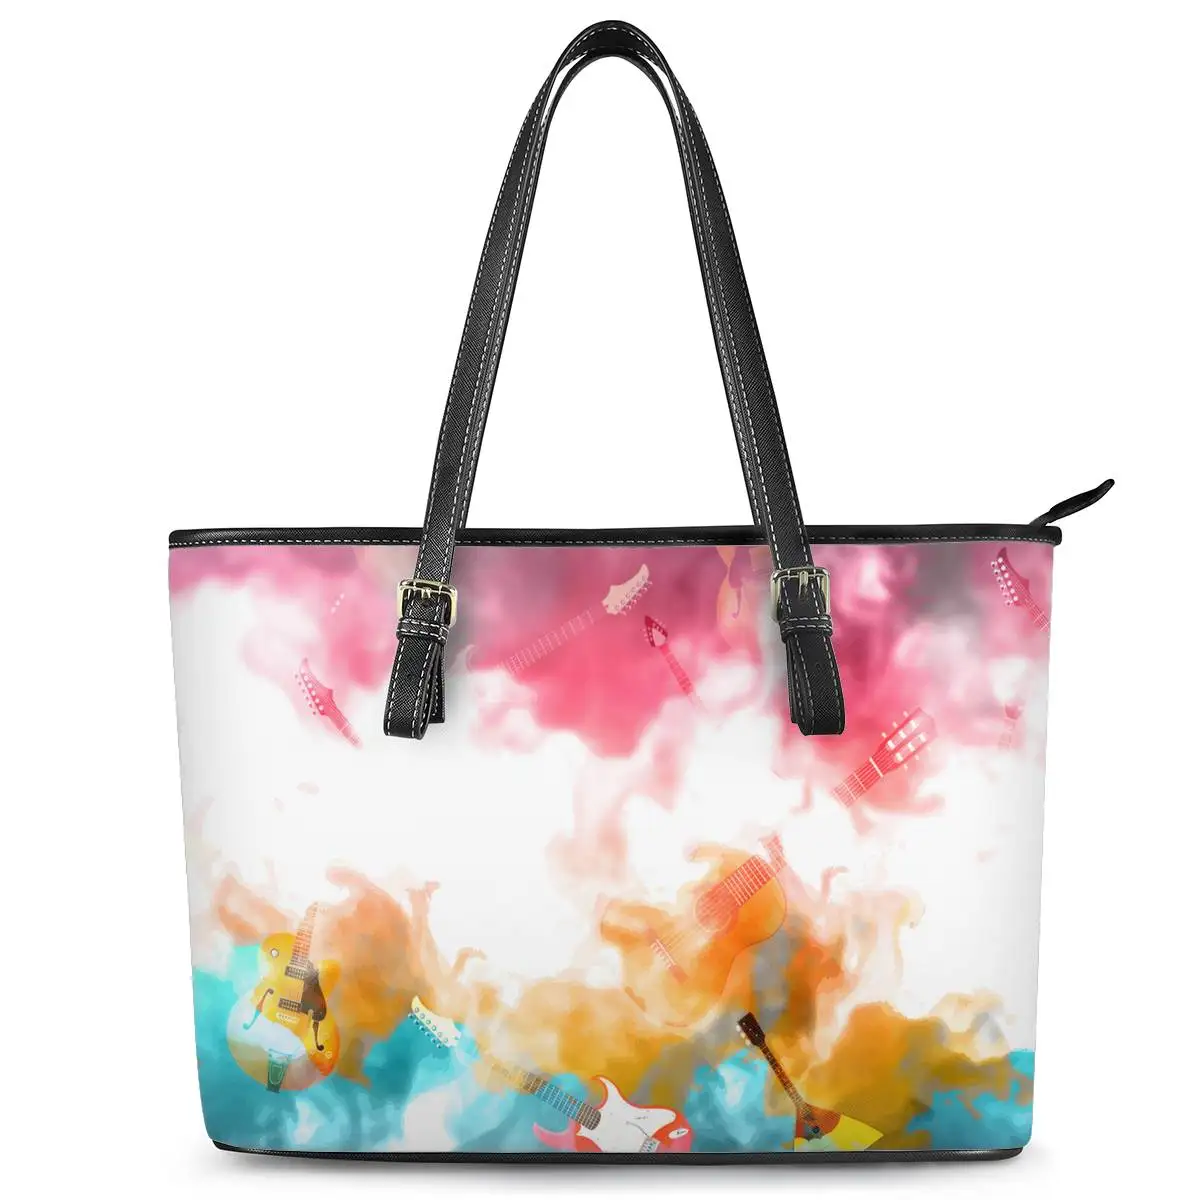 Womens Leather Tote Shoulder Bags Handbags with Colorful Guitar 